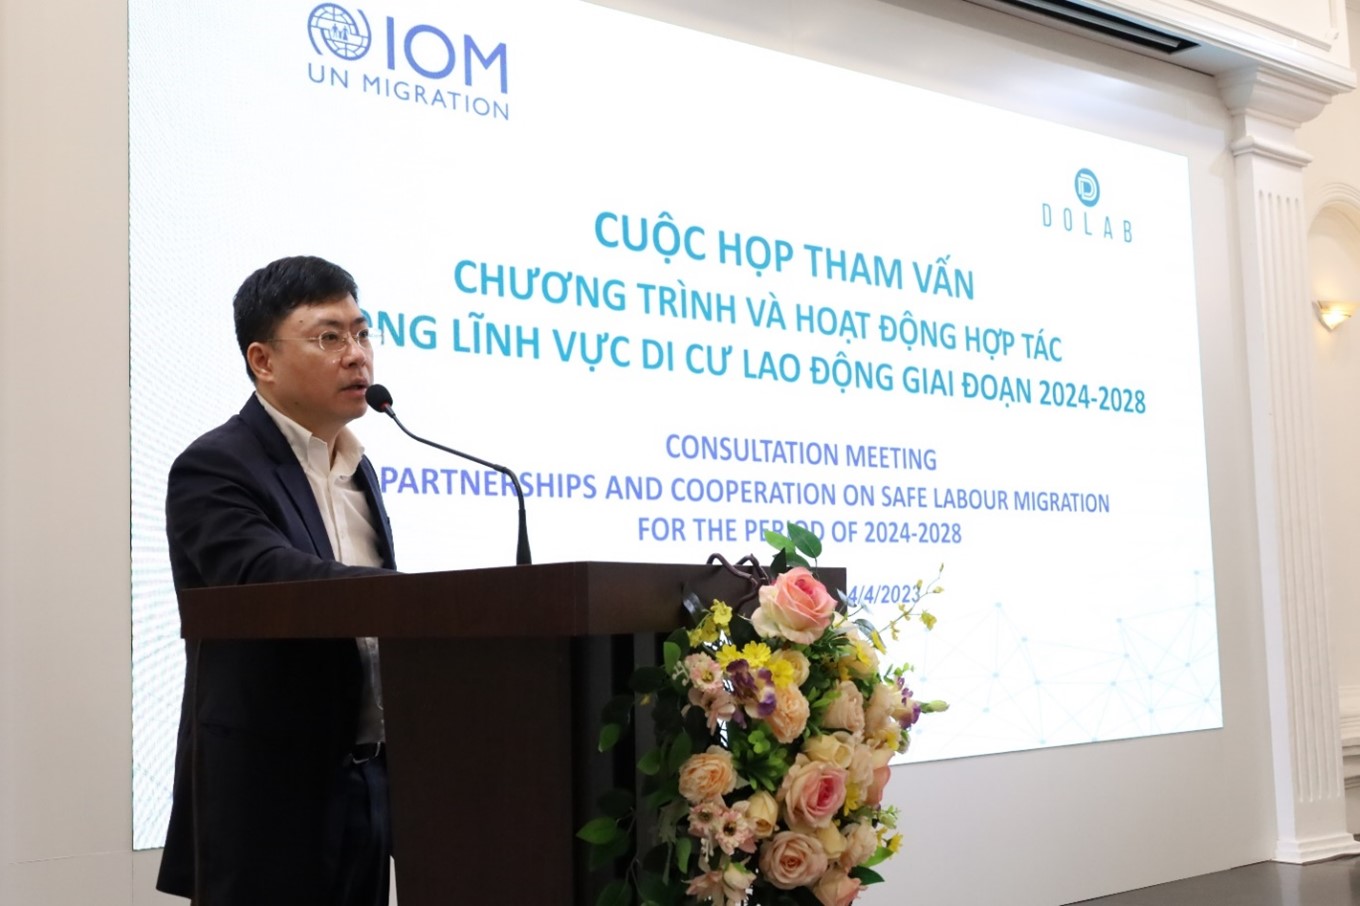 Mr. Dang Si Dung, Deputy Director of DOLAB, delivered his opening remark at the consultation workshop on 14 April, 2023